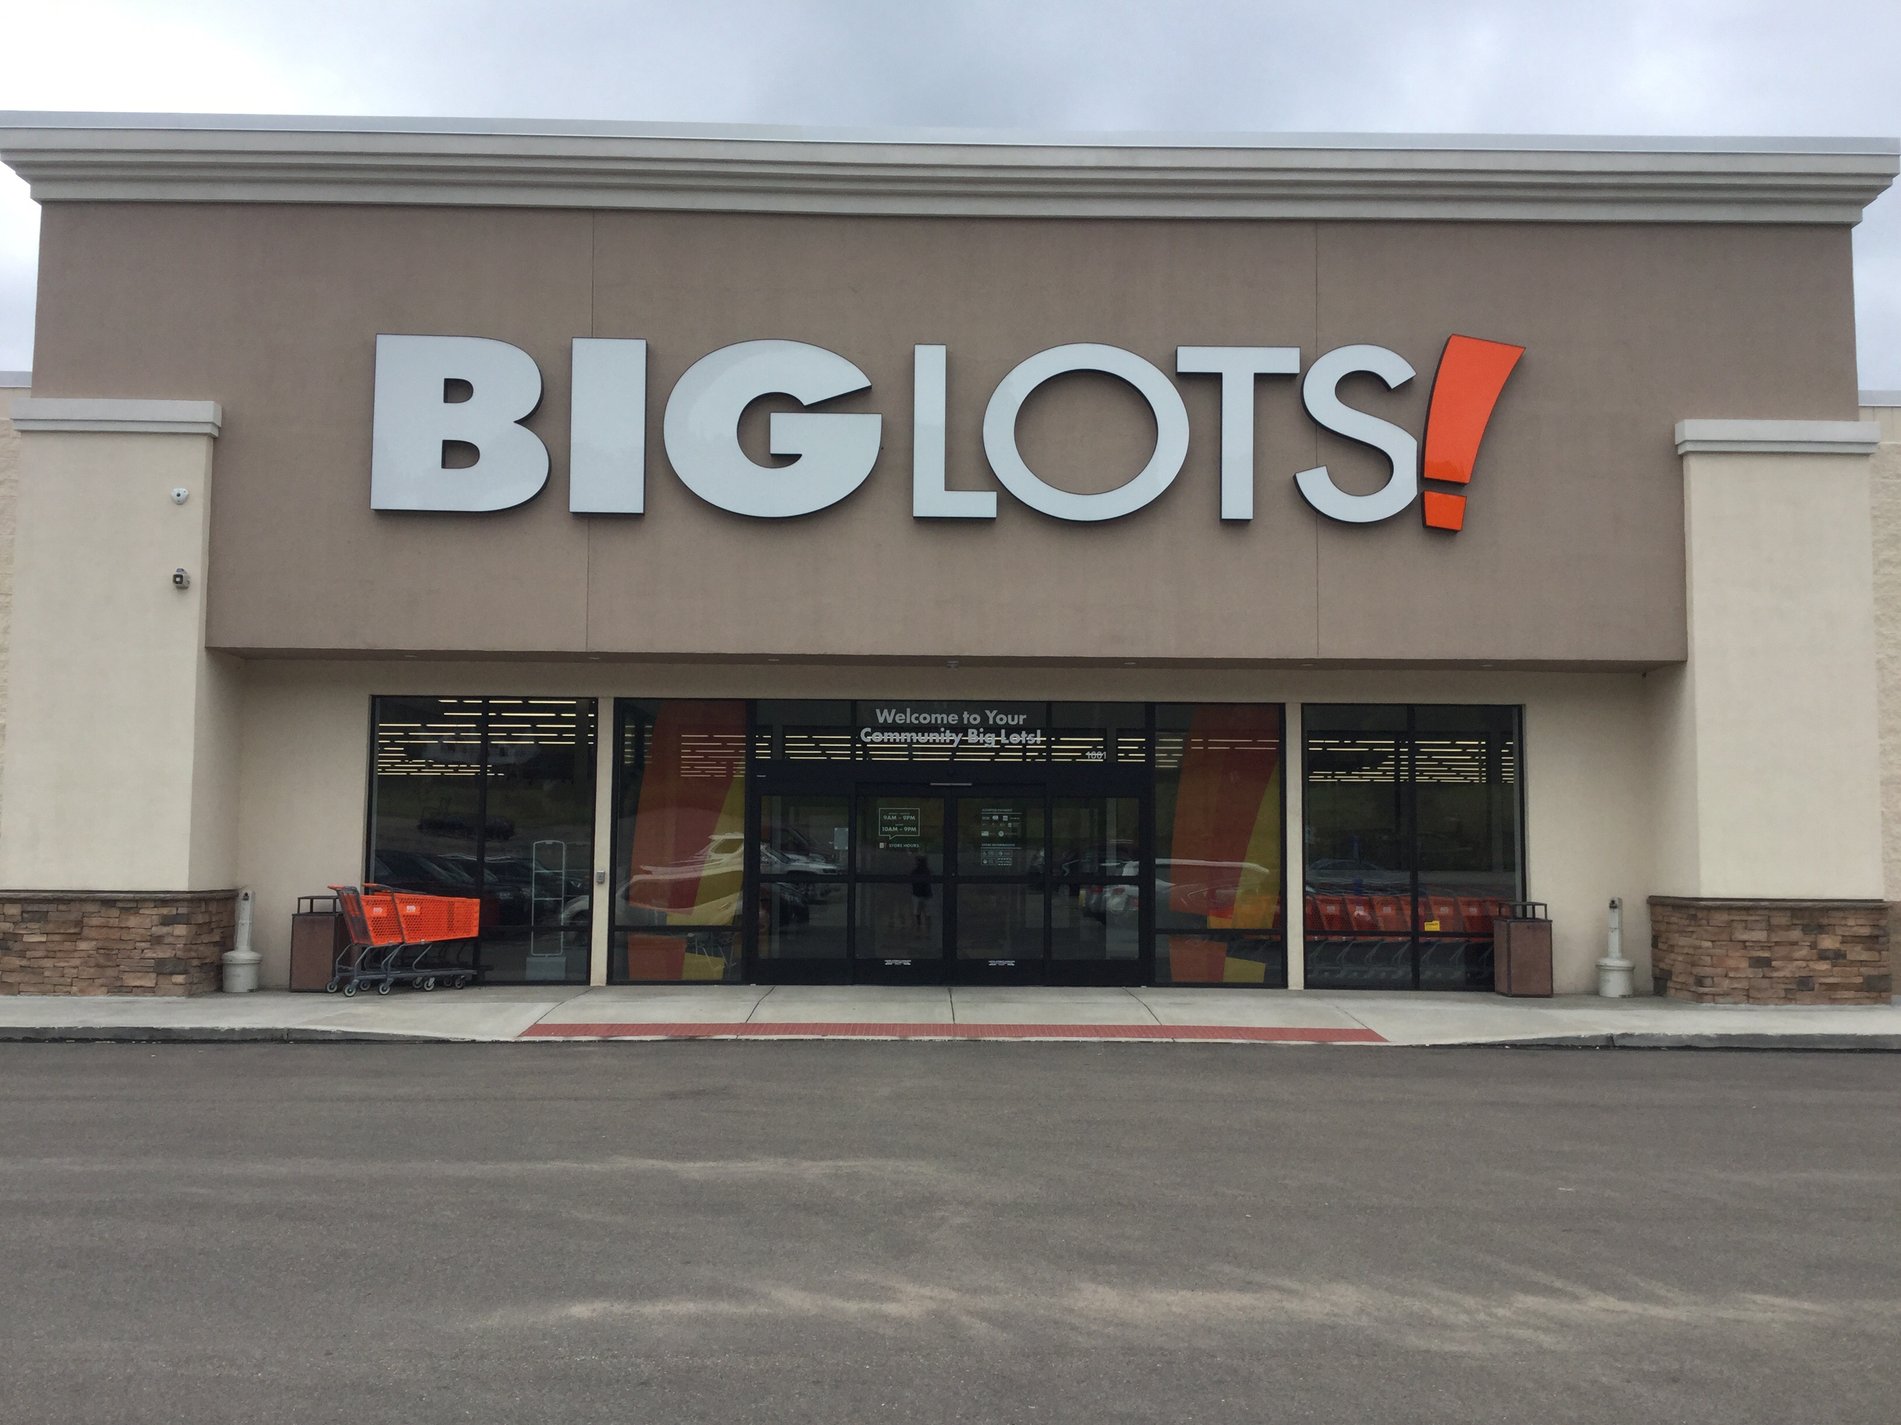 Visit The Big Lots in Bradford, PA Located on E. Main St